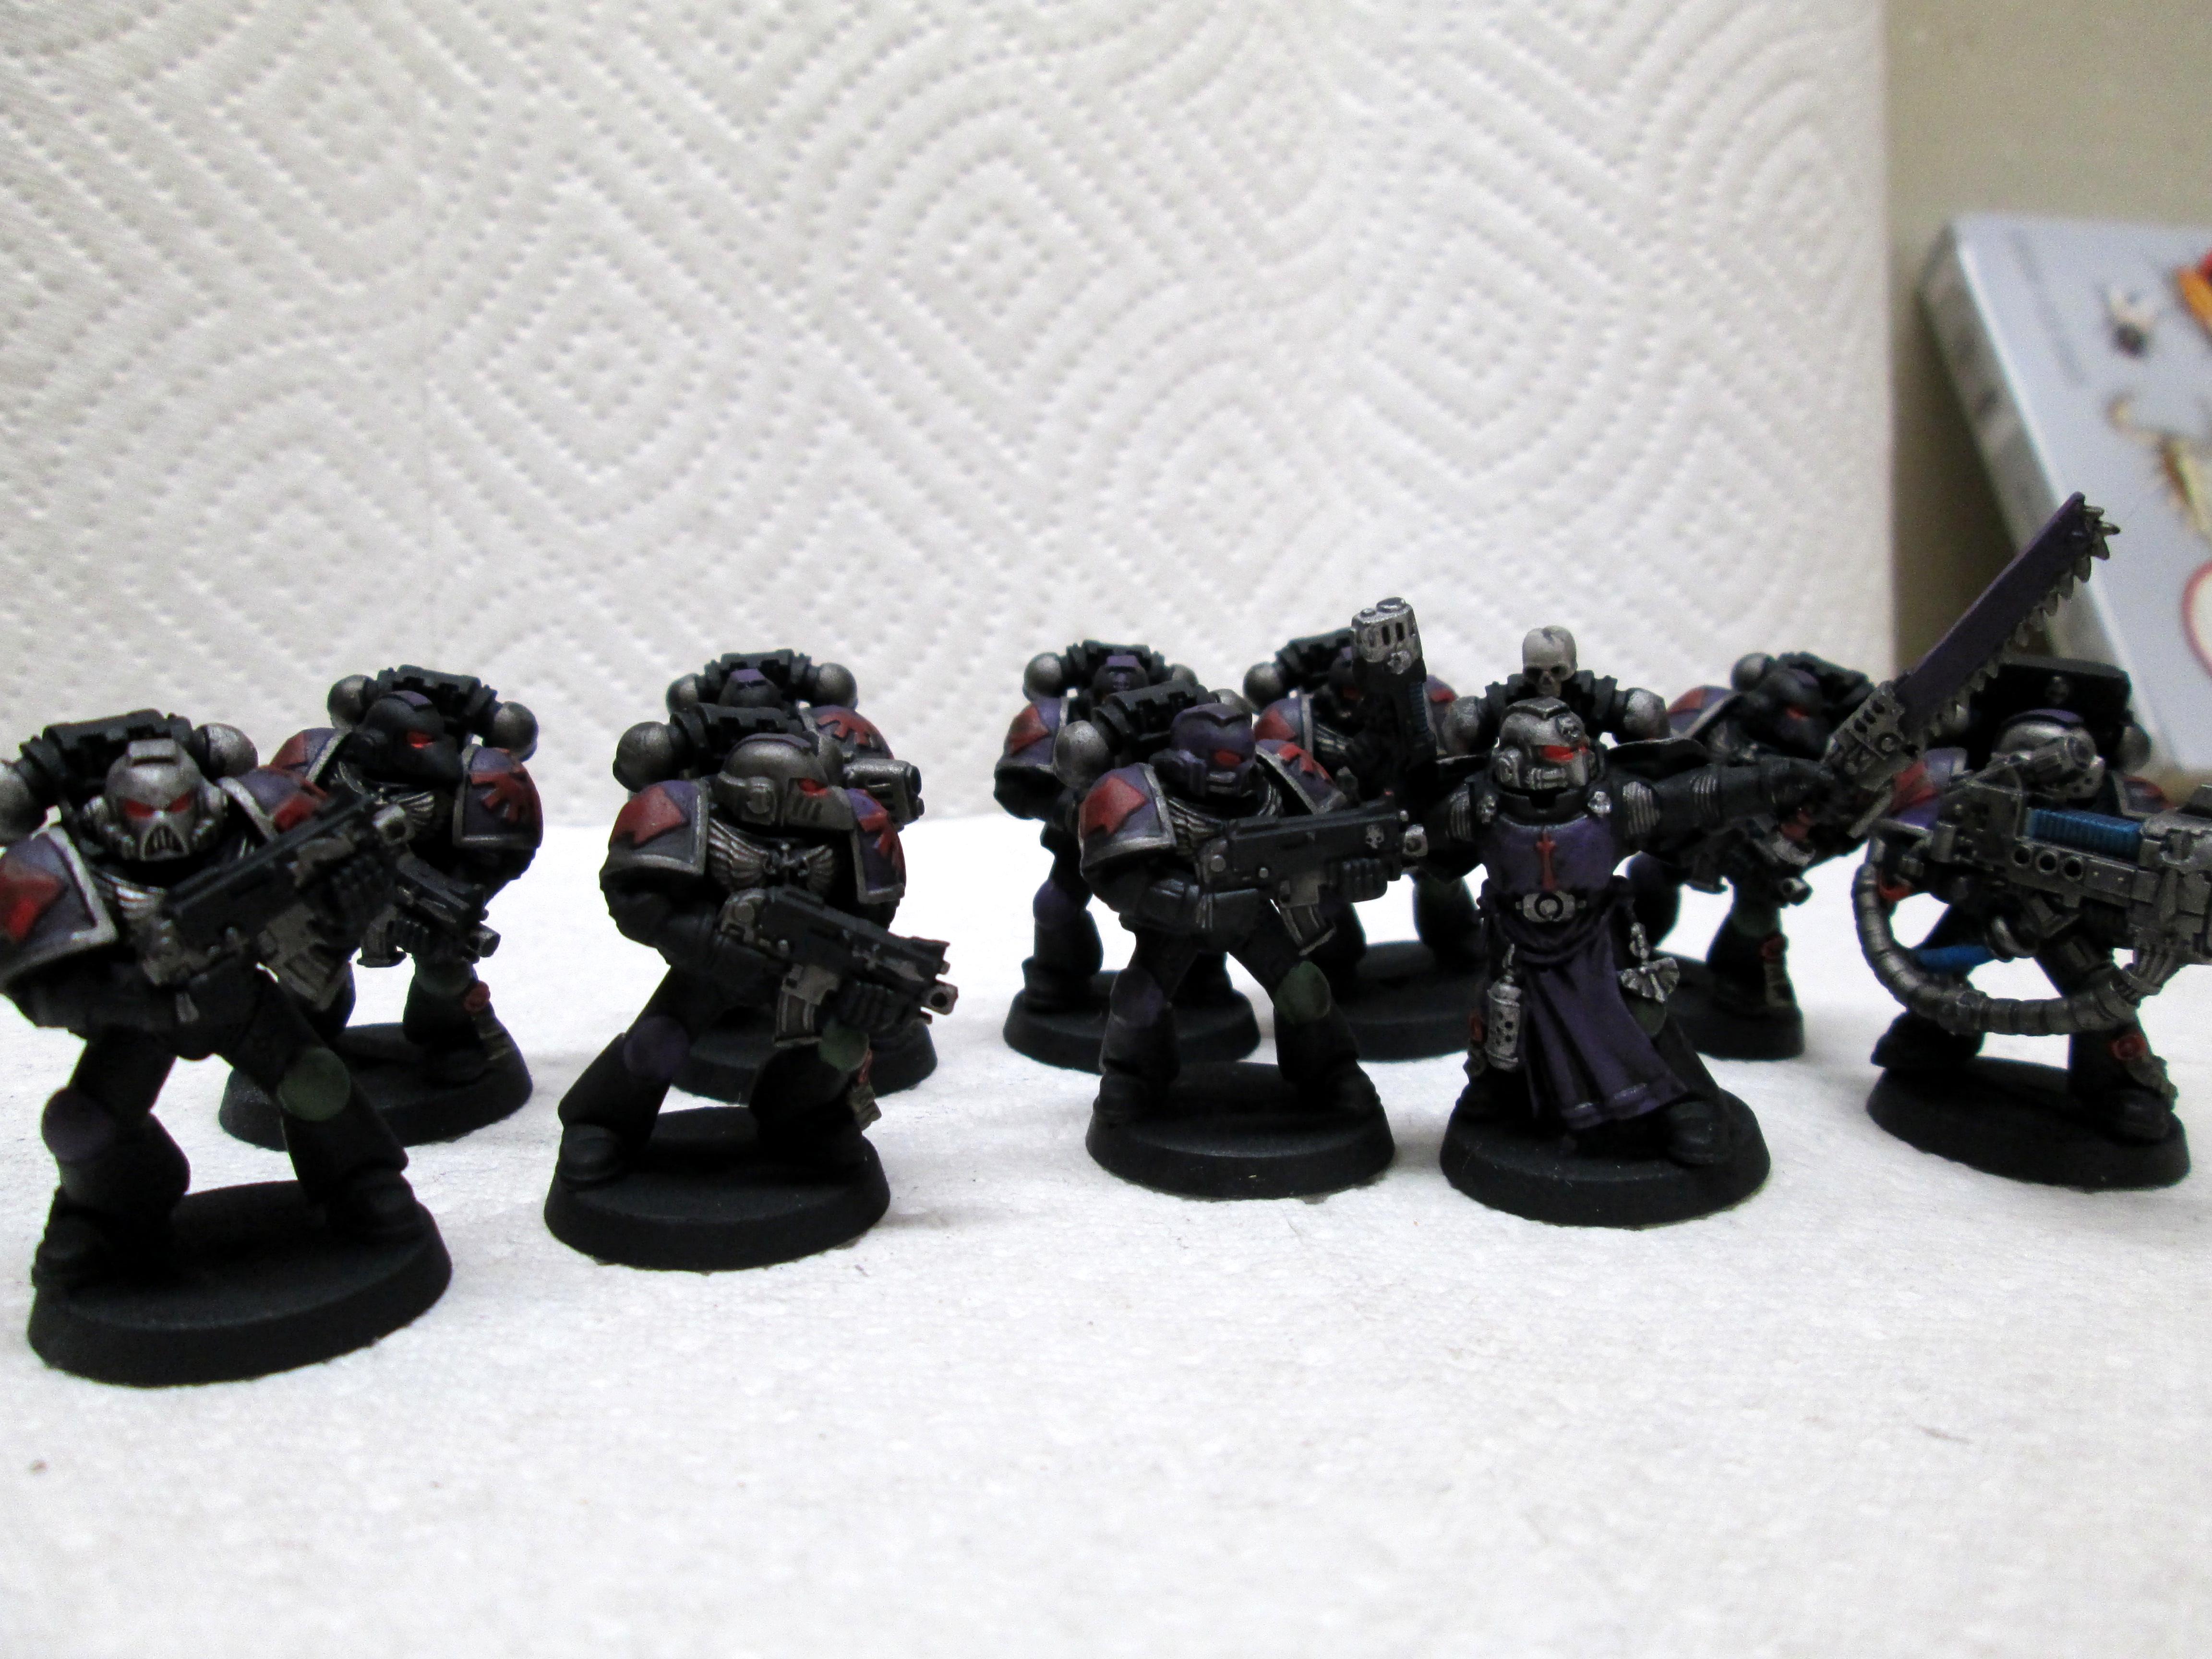 Critique, Custom, Finished, Minis, Painted, Space Marines, Warhammer 40,000